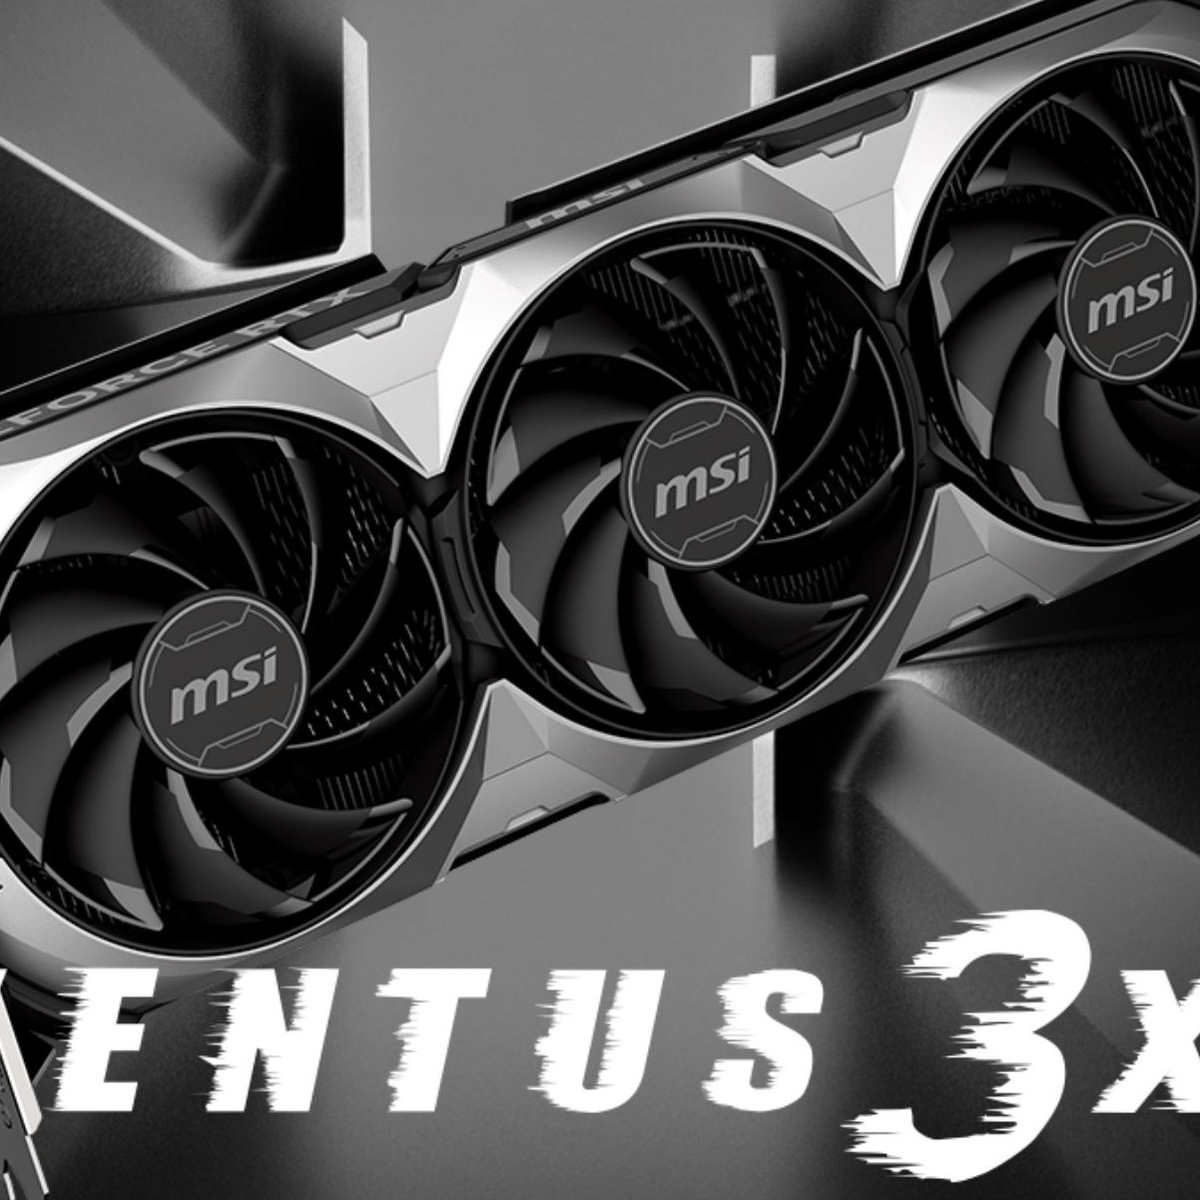 Black Friday sets a new low price for this RTX 4060 Ti graphics